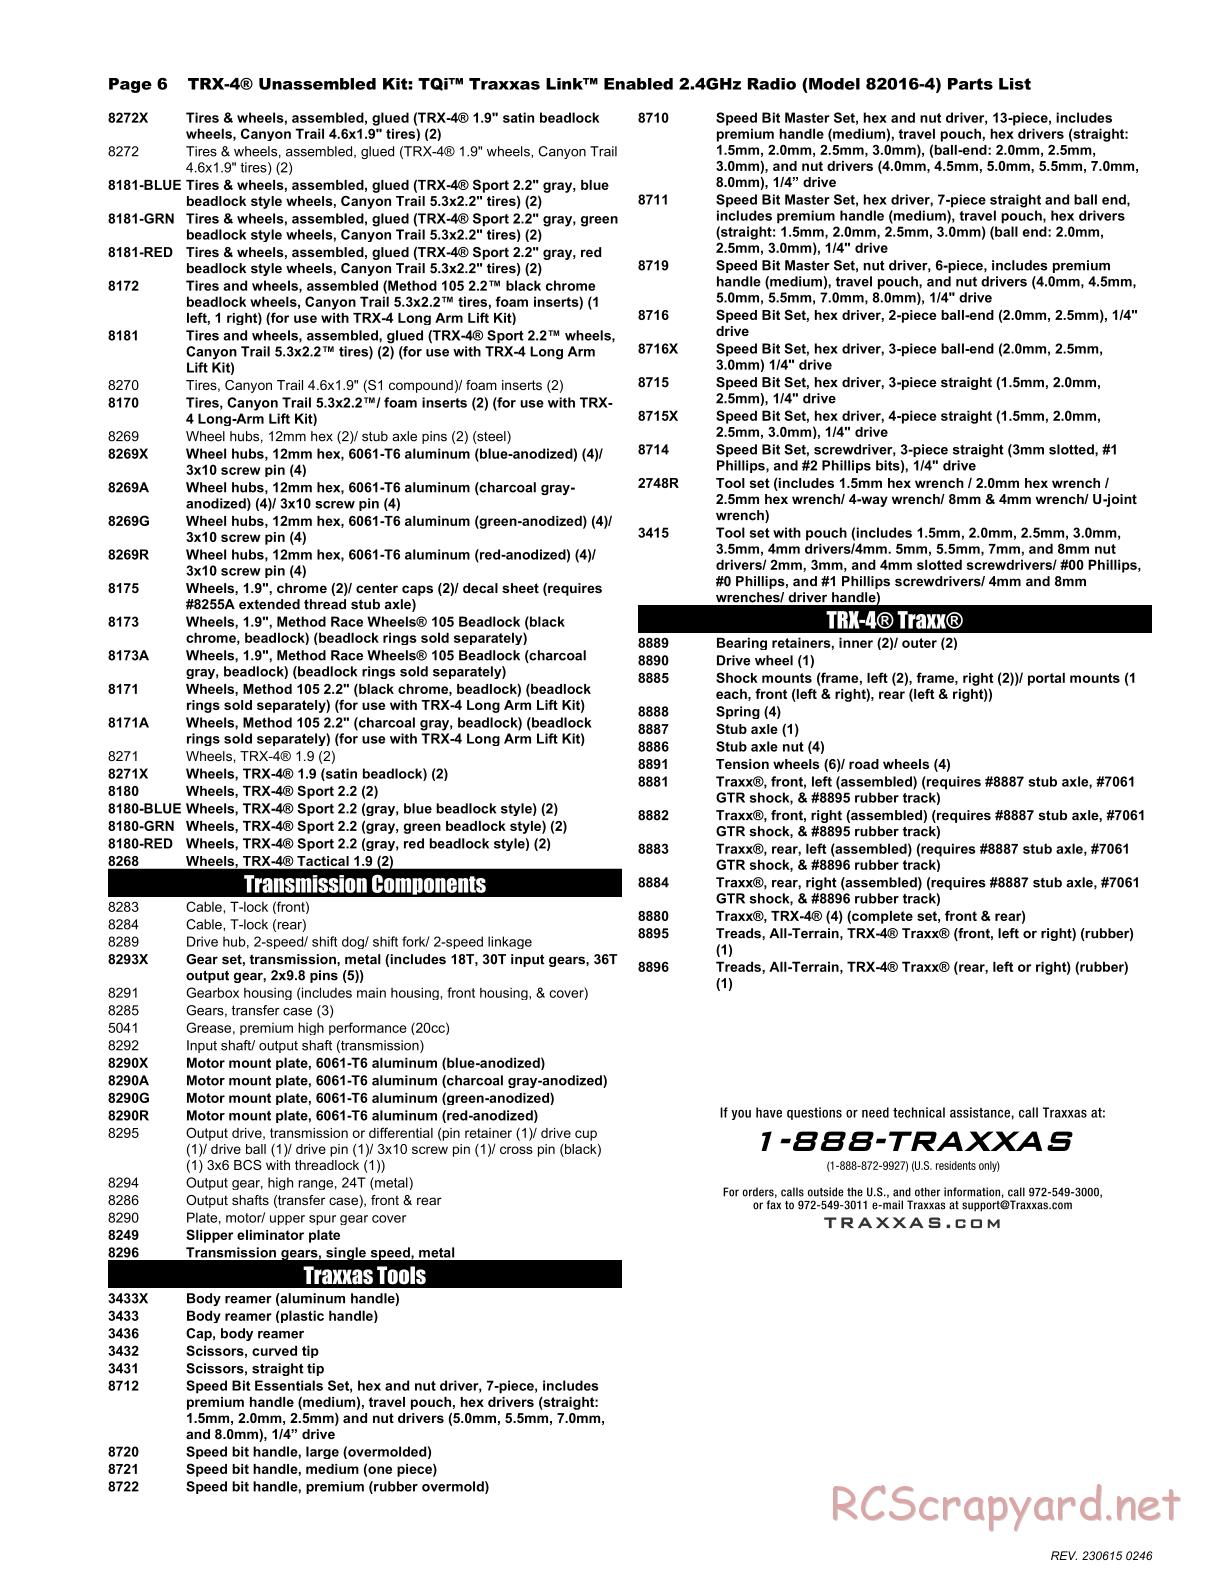 Traxxas - TRX-4 Chassis (2018) - Parts List - Page 6